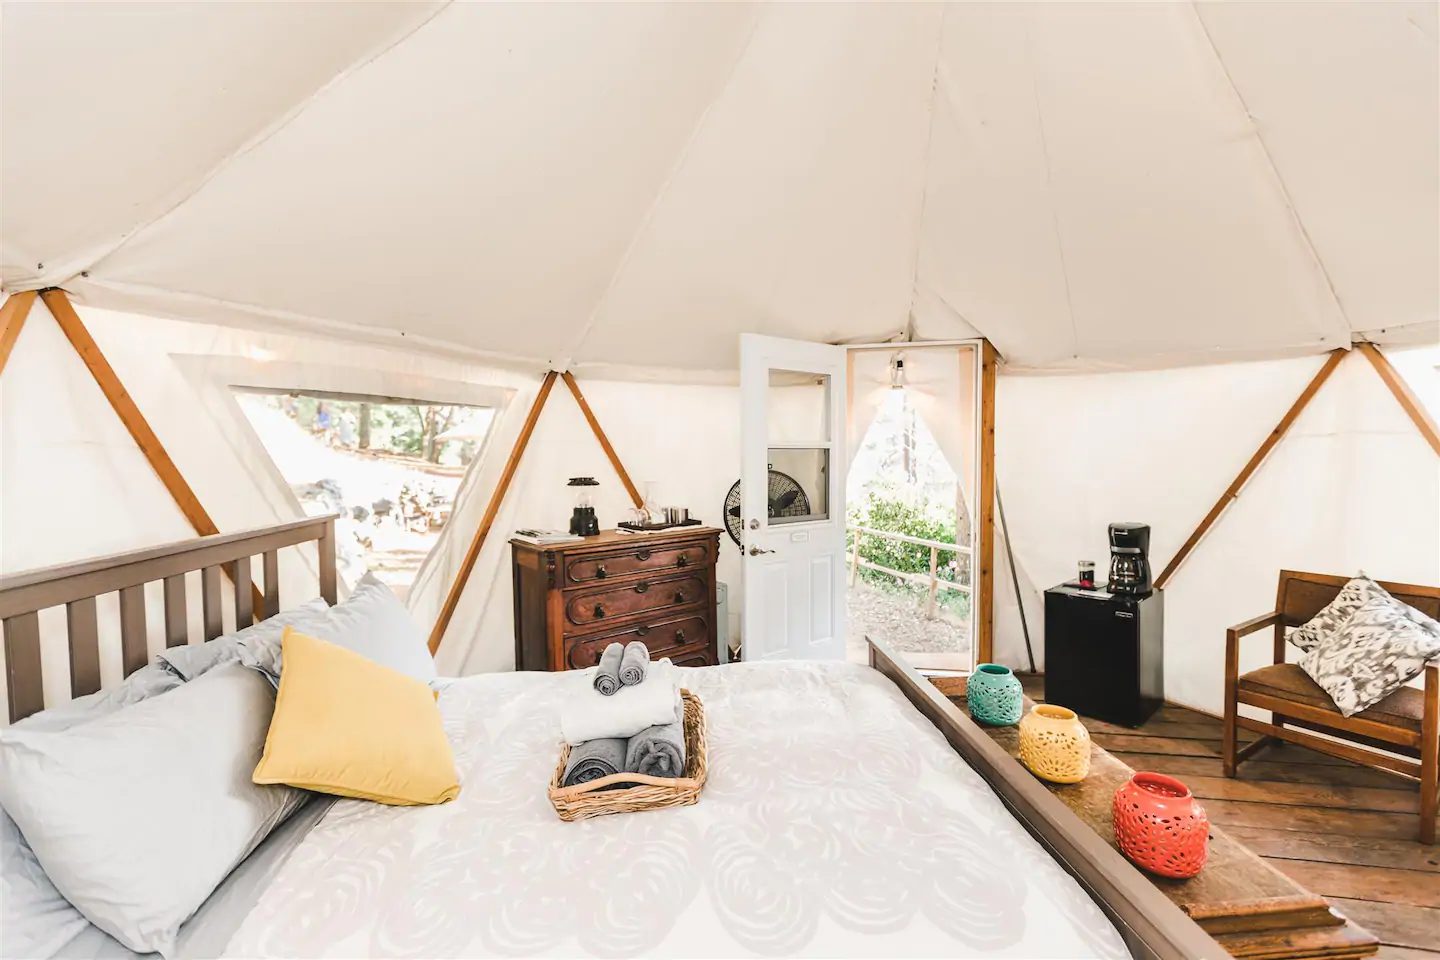 The dreamy, white interior of this small and cozy yurt Airbnb, with a bed, dresser, small fridge, coffee maker, and chair.  One of the best California Airbnbs!